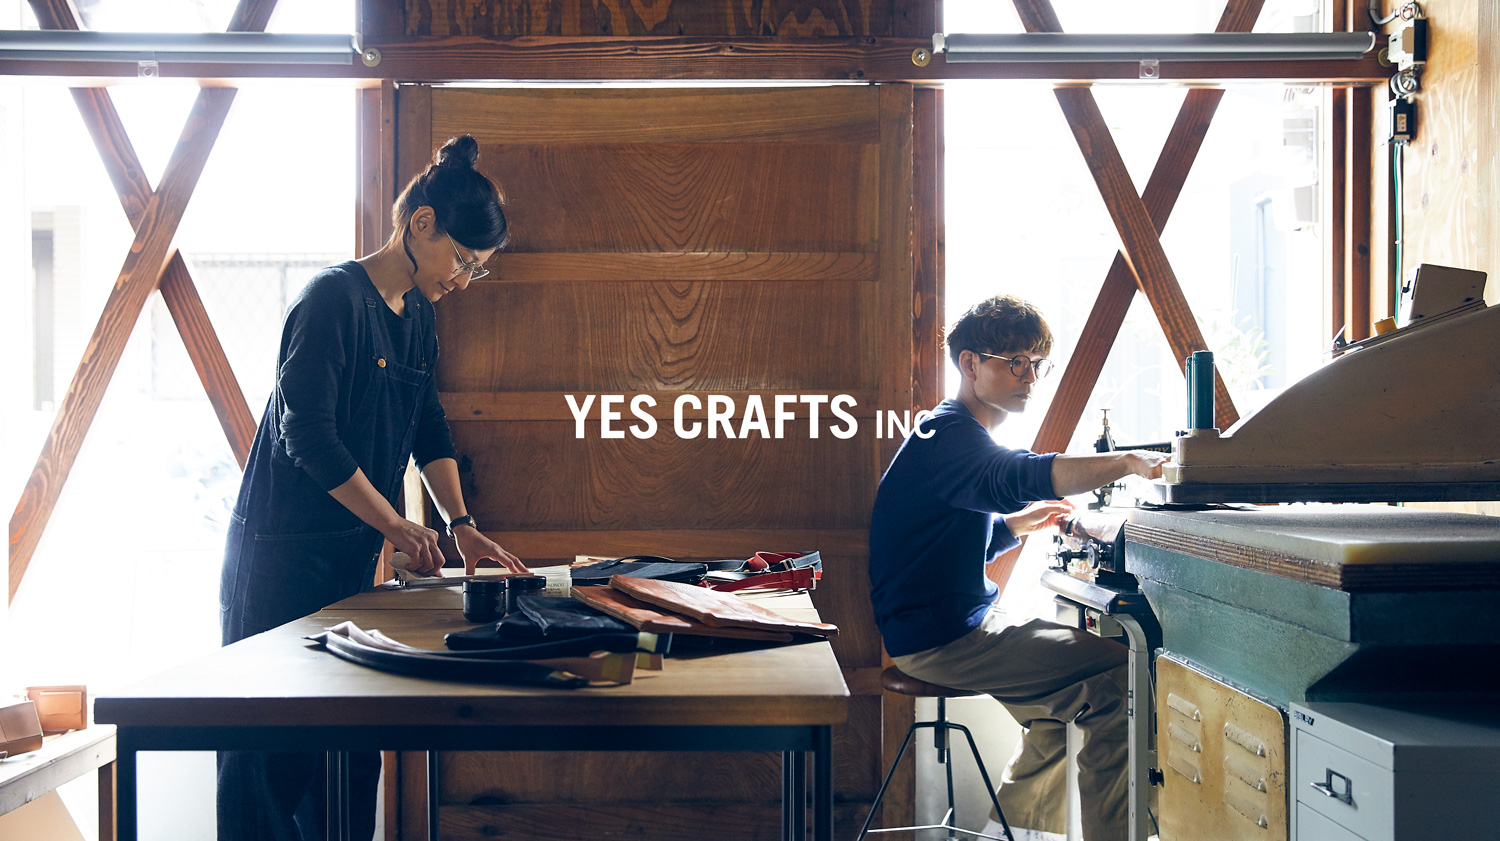 YES CRAFTS INC